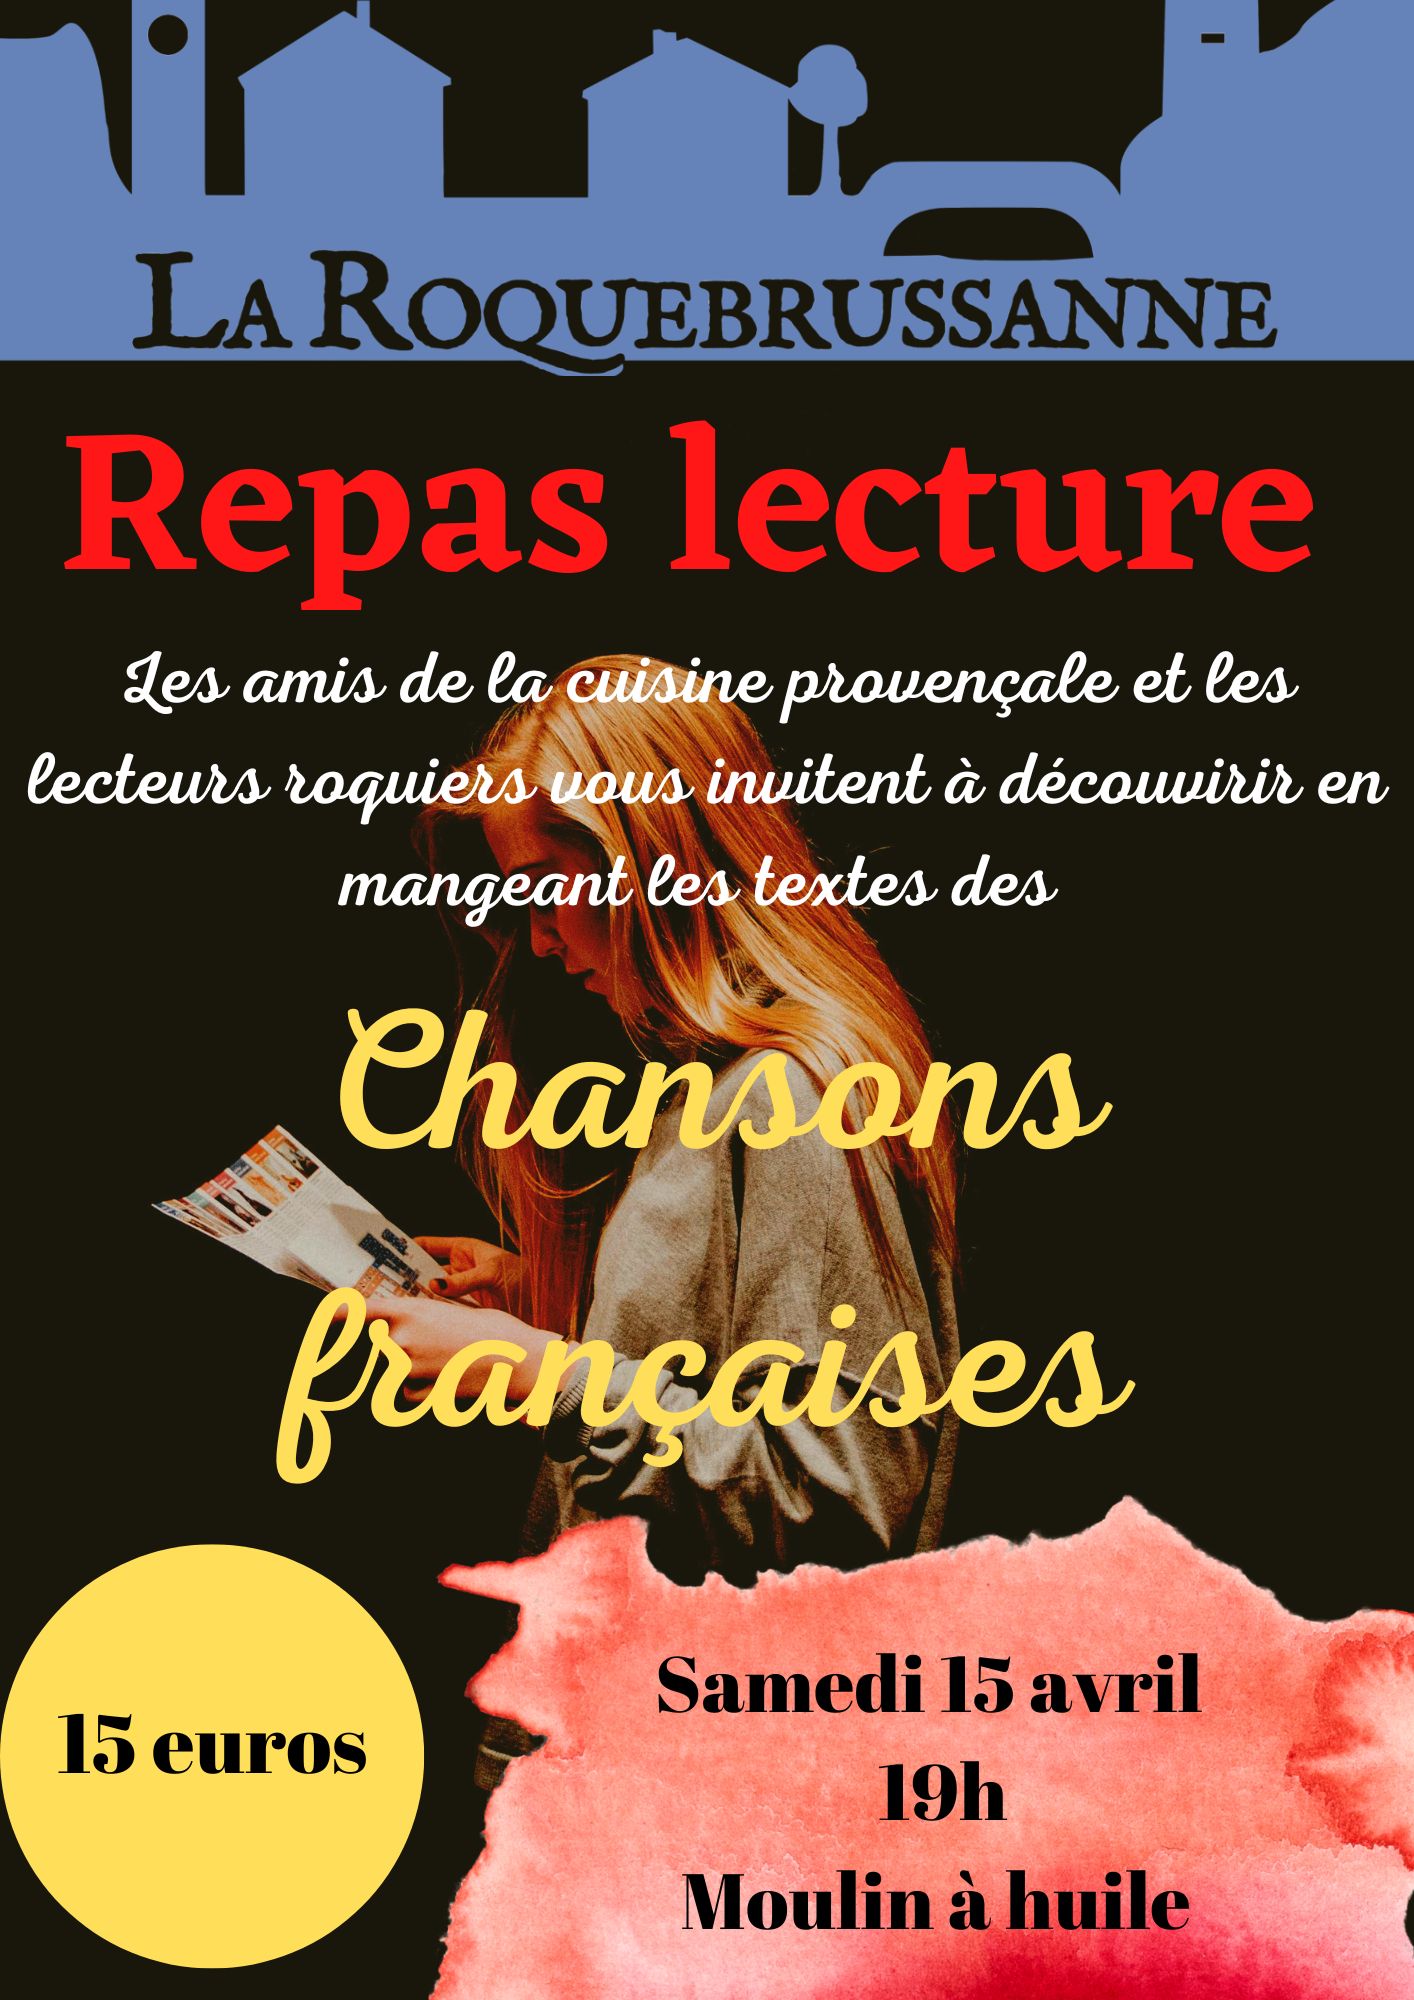  Repas lecture avril 23